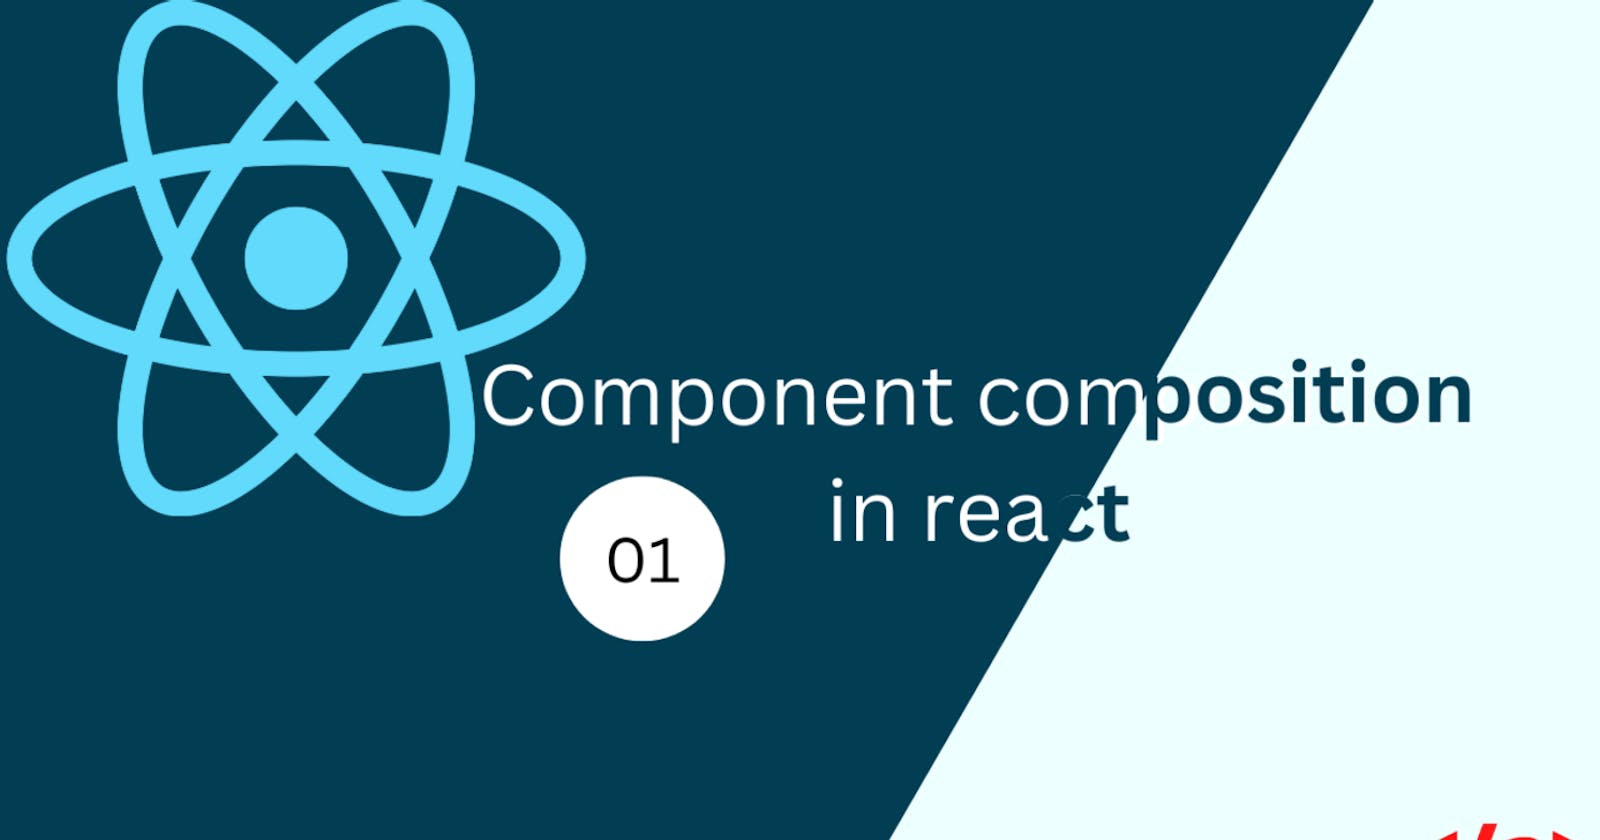 Components composition in react